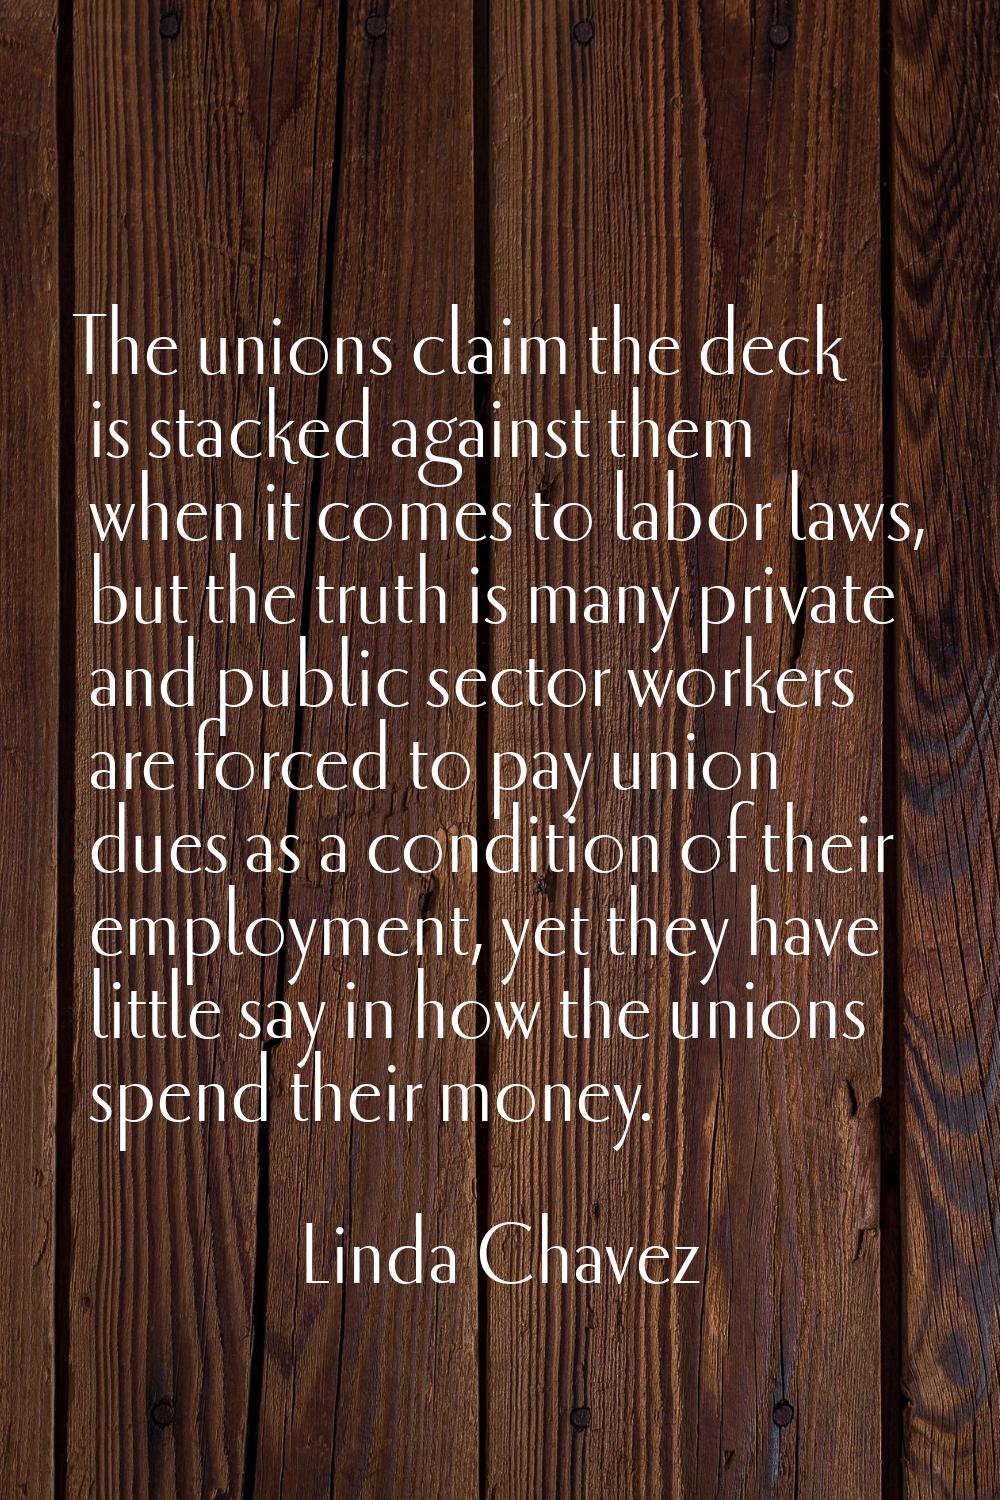 The unions claim the deck is stacked against them when it comes to labor laws, but the truth is man